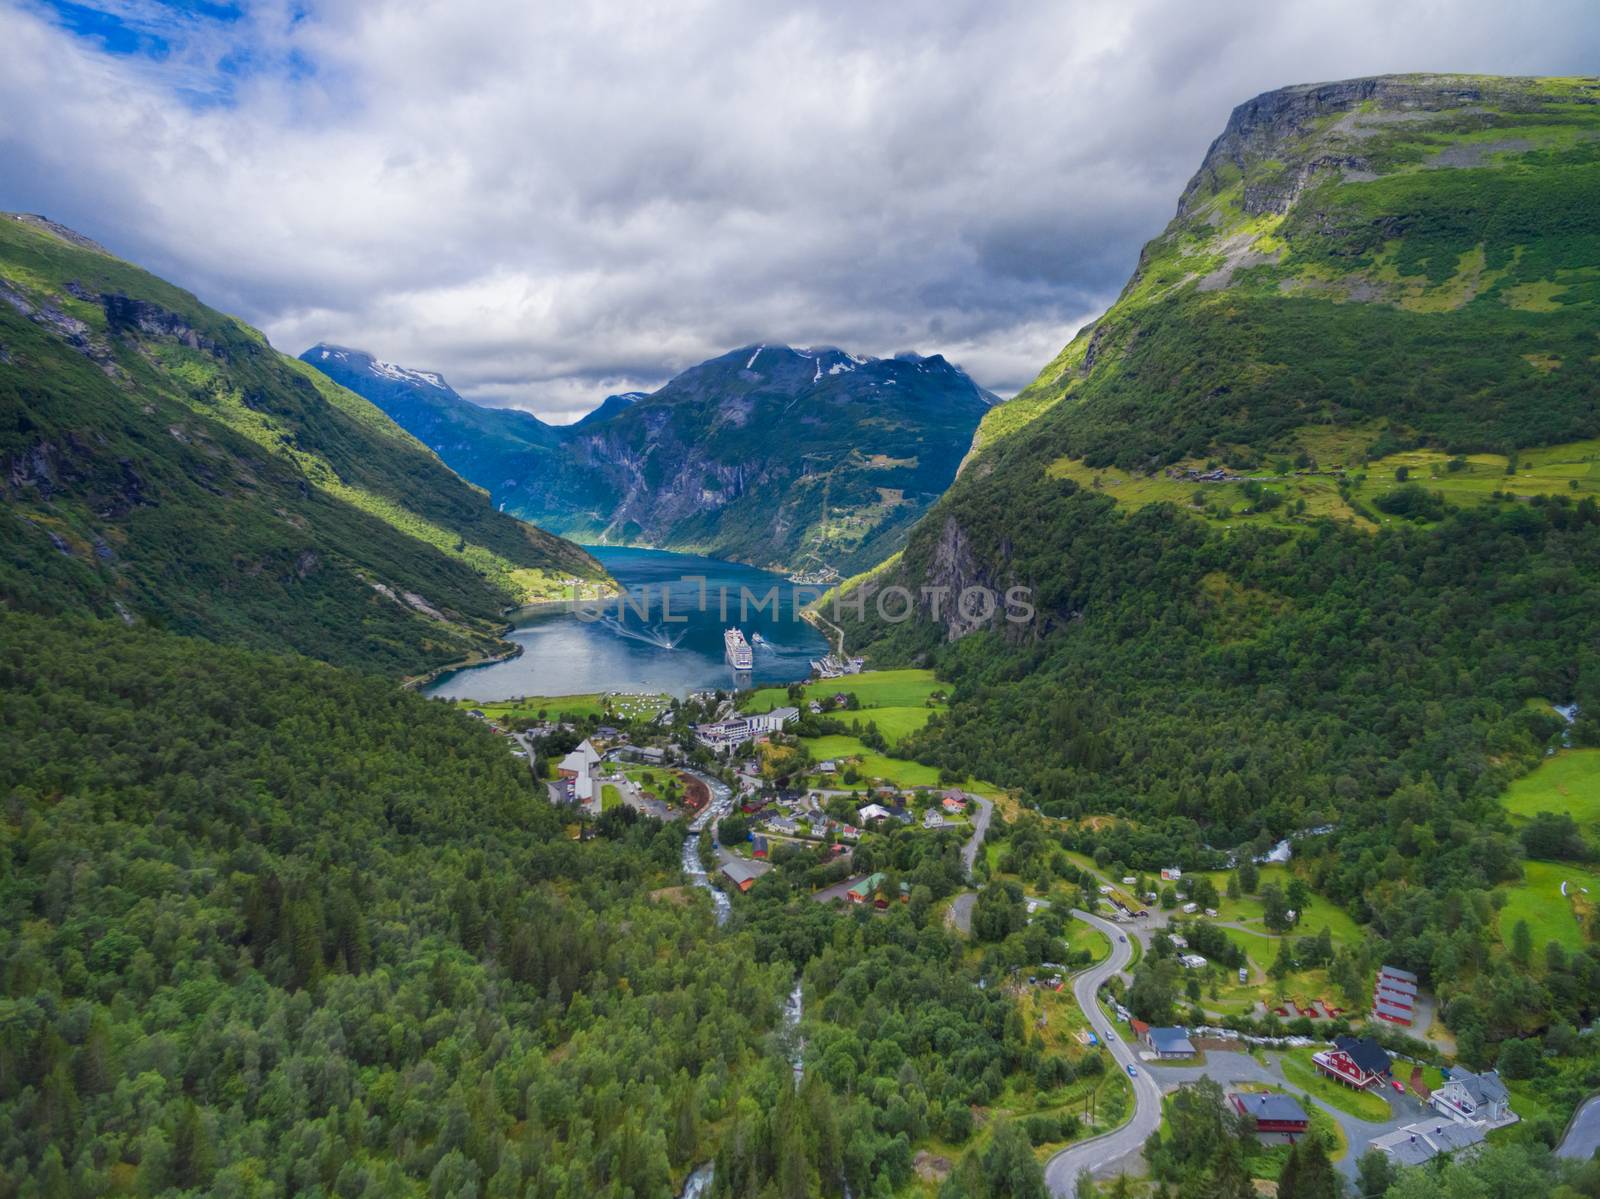 Geiranger by Harvepino